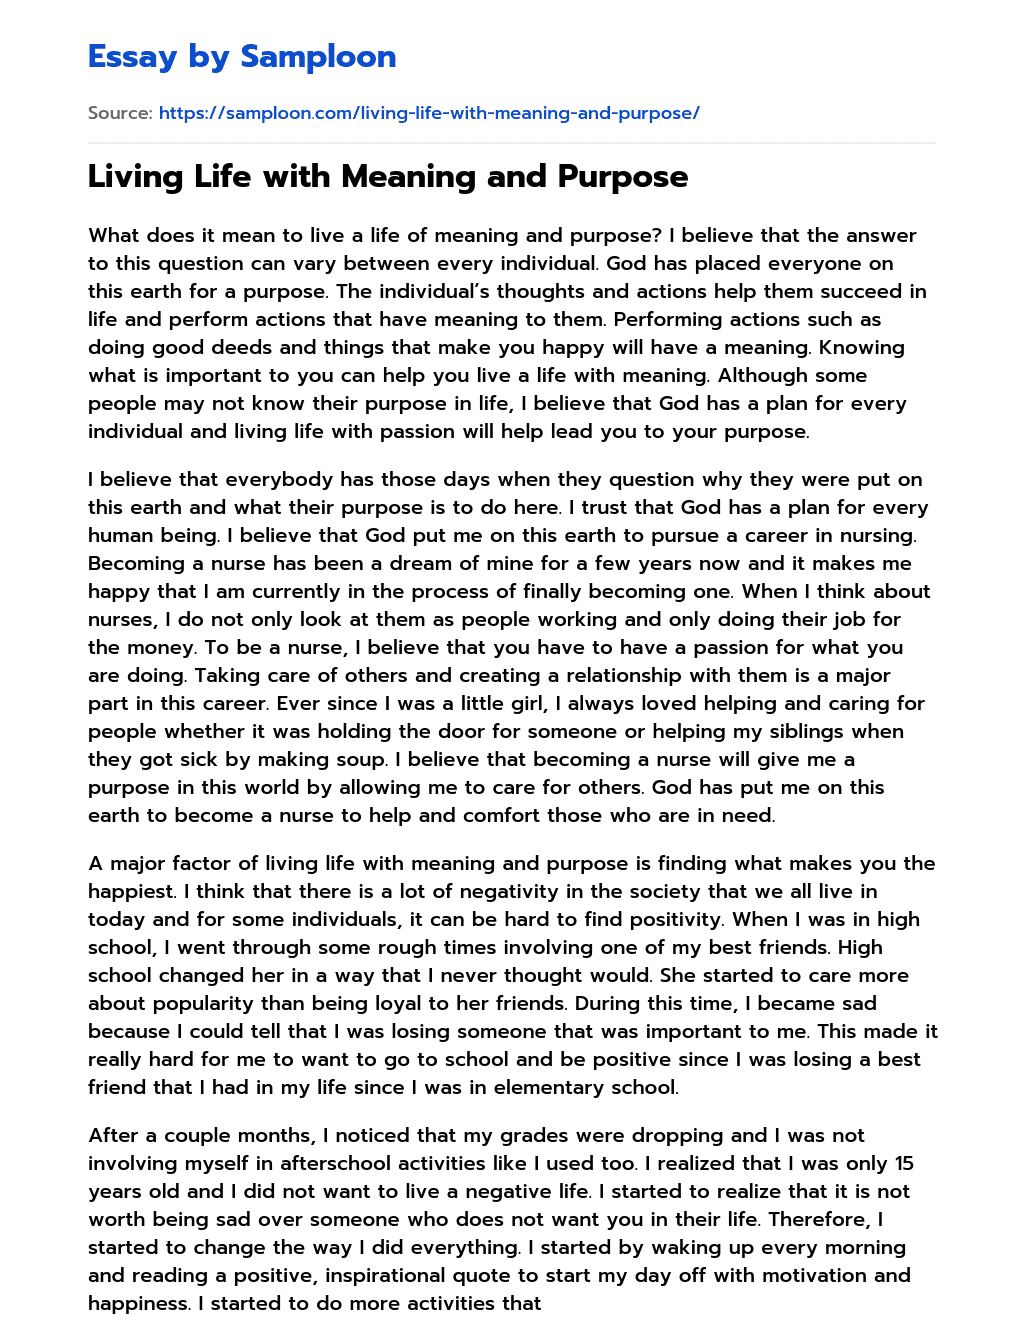 Living Life with Meaning and Purpose essay